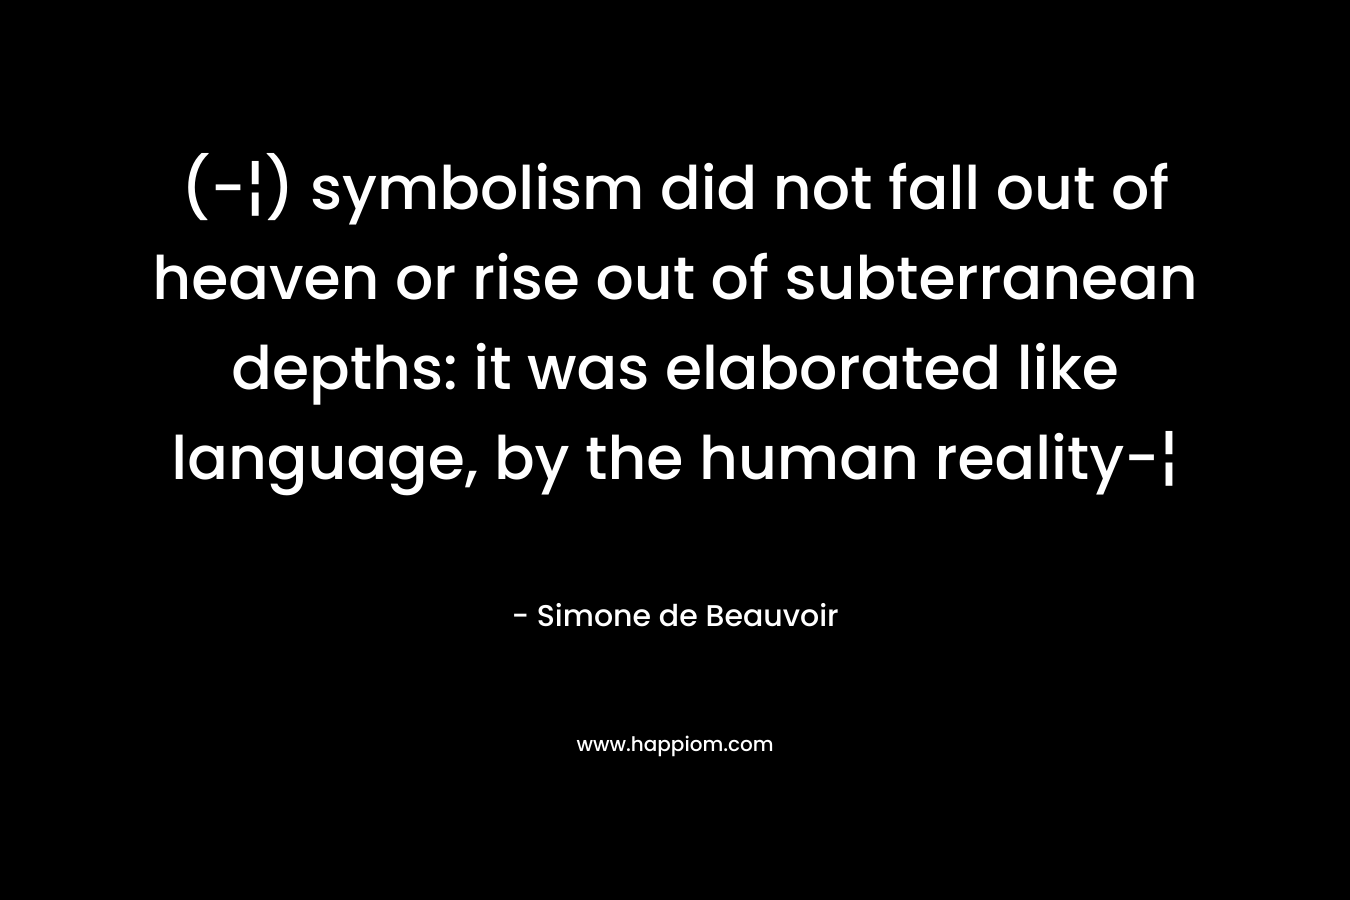 (-¦) symbolism did not fall out of heaven or rise out of subterranean depths: it was elaborated like language, by the human reality-¦